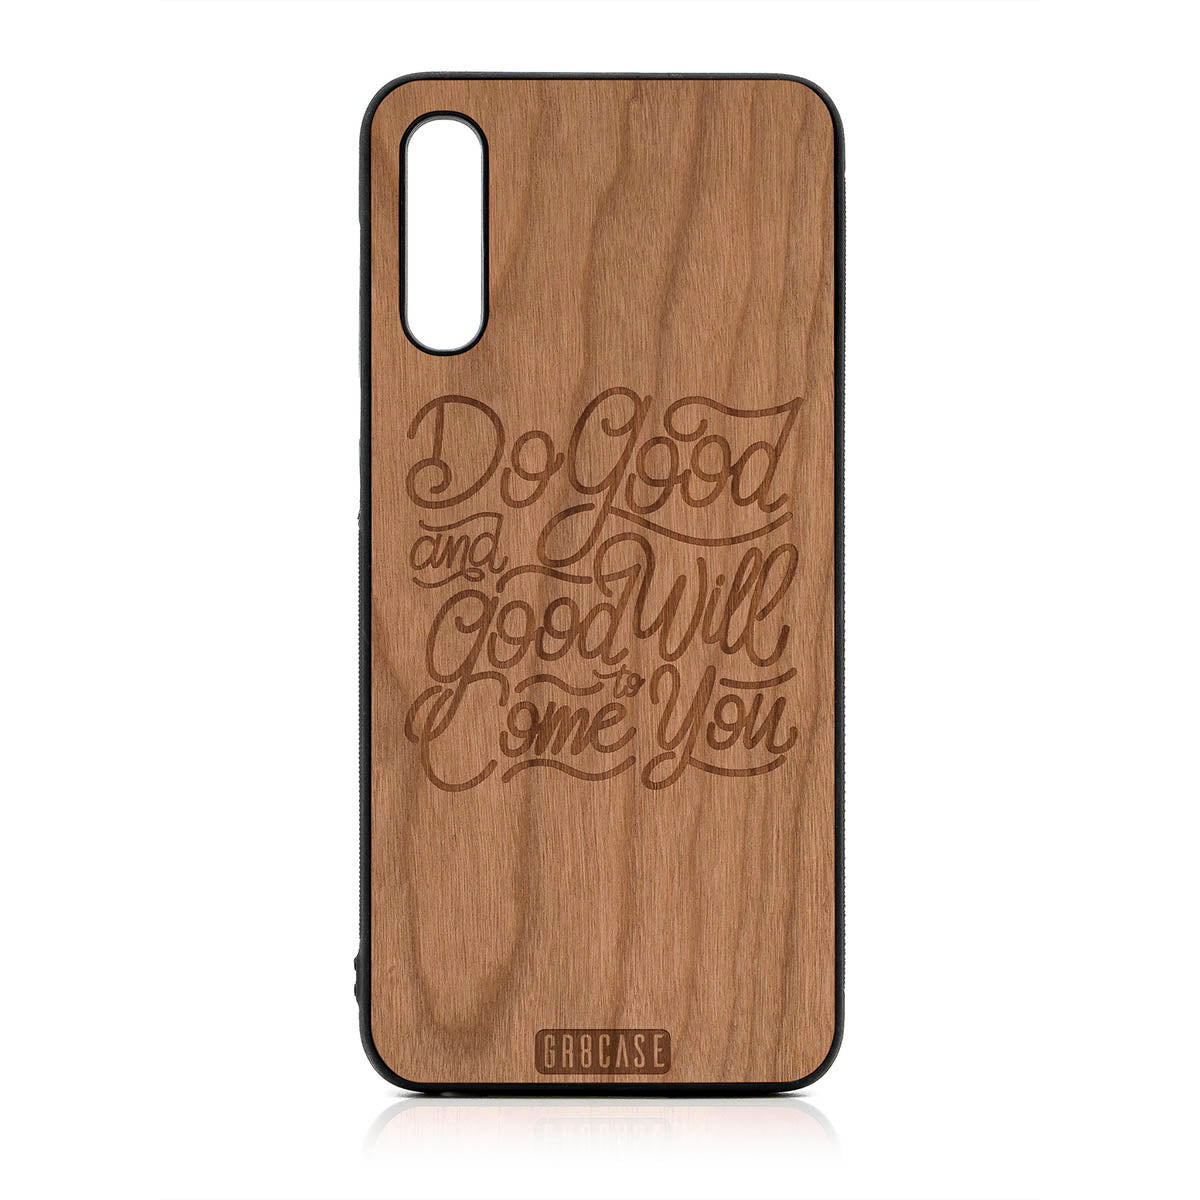 Do Good And Good Will Come To You Design Wood Case For Samsung Galaxy A50 by GR8CASE